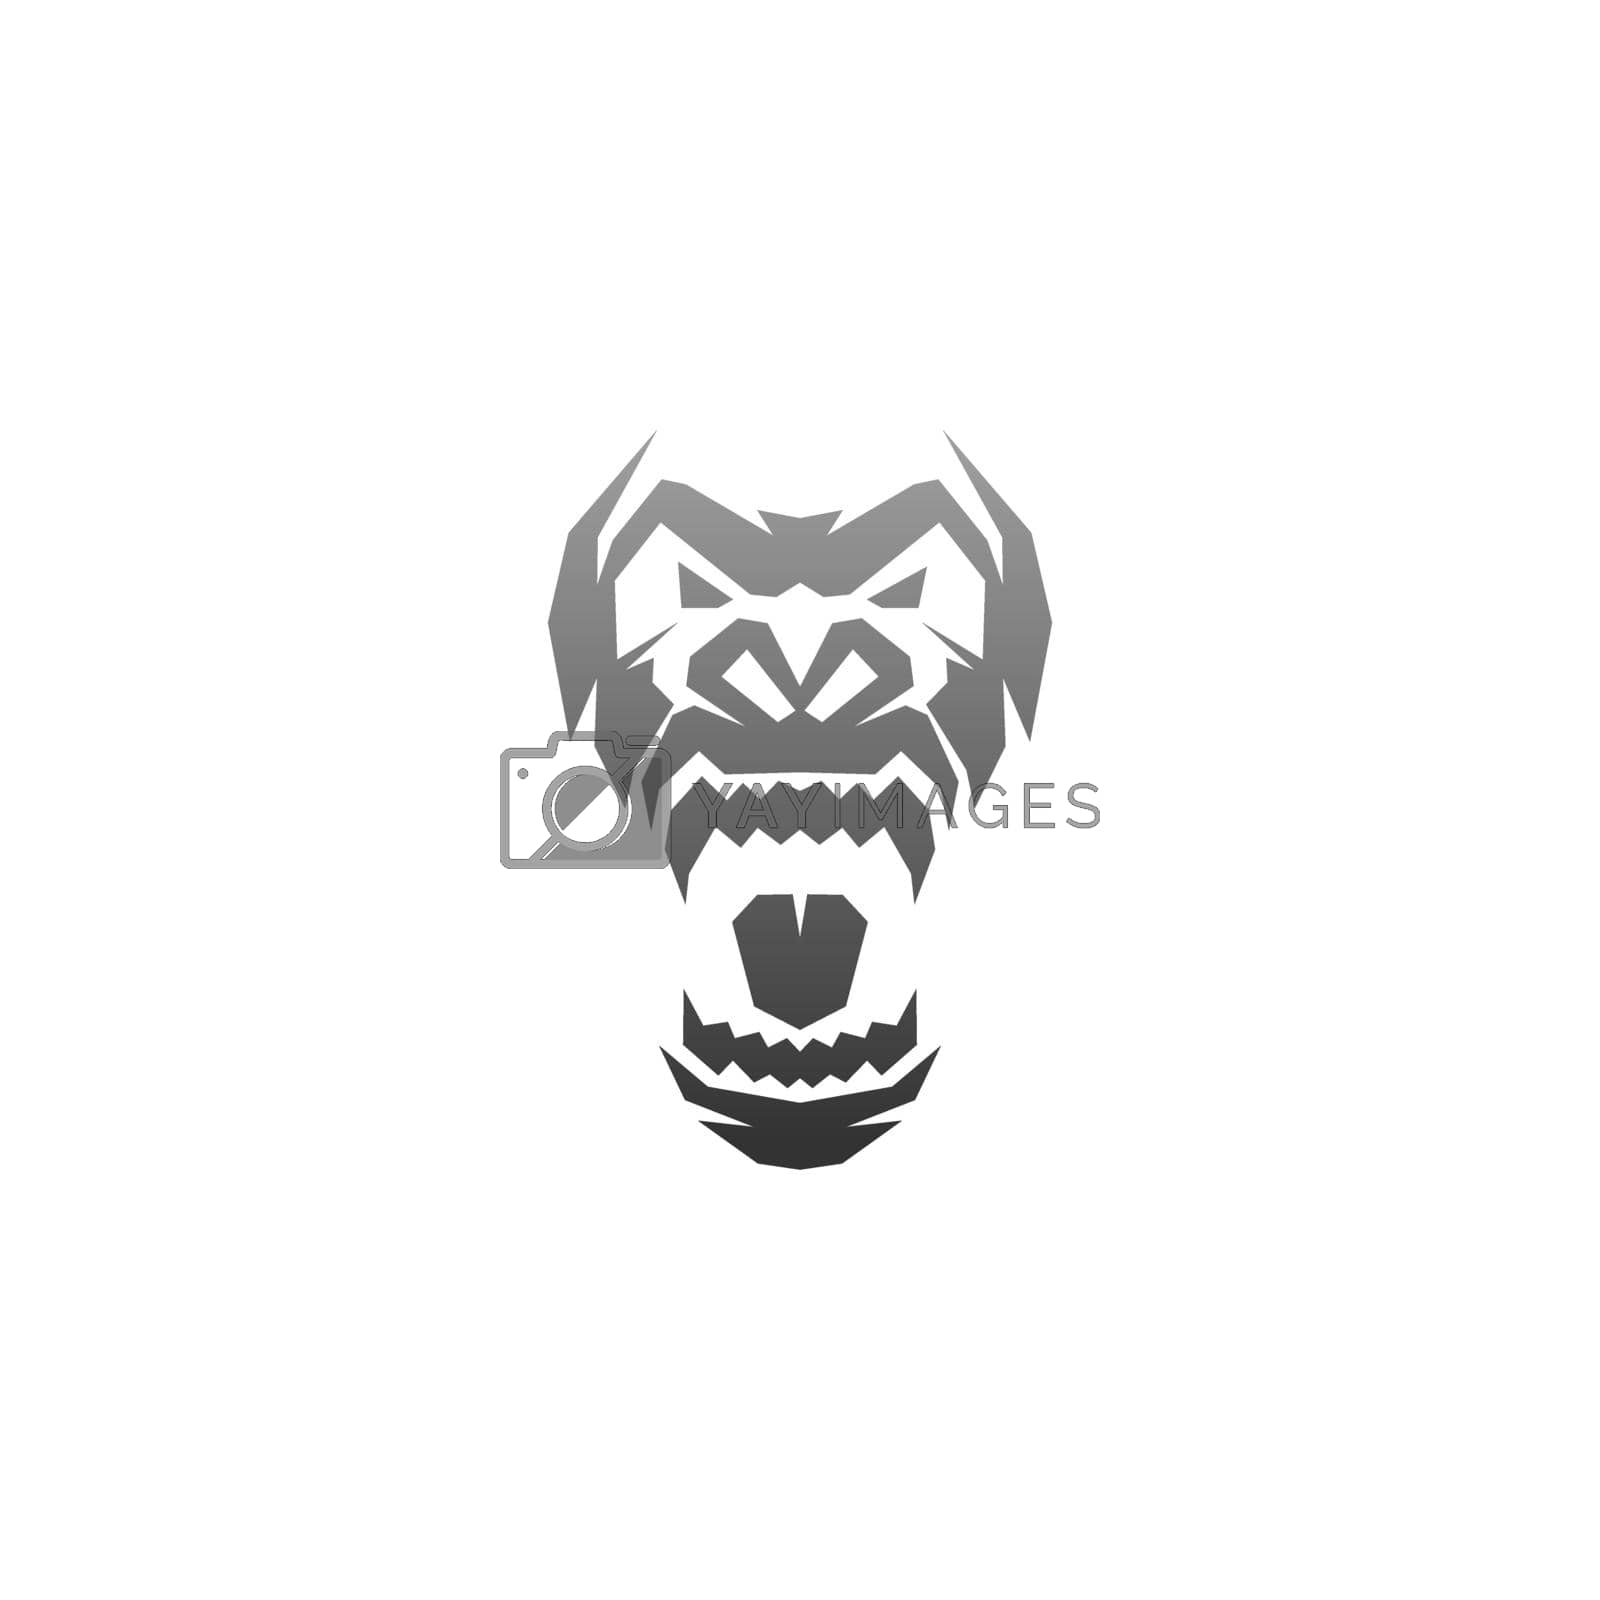 Royalty free image of Gorilla logo design vector icon template by bellaxbudhong3